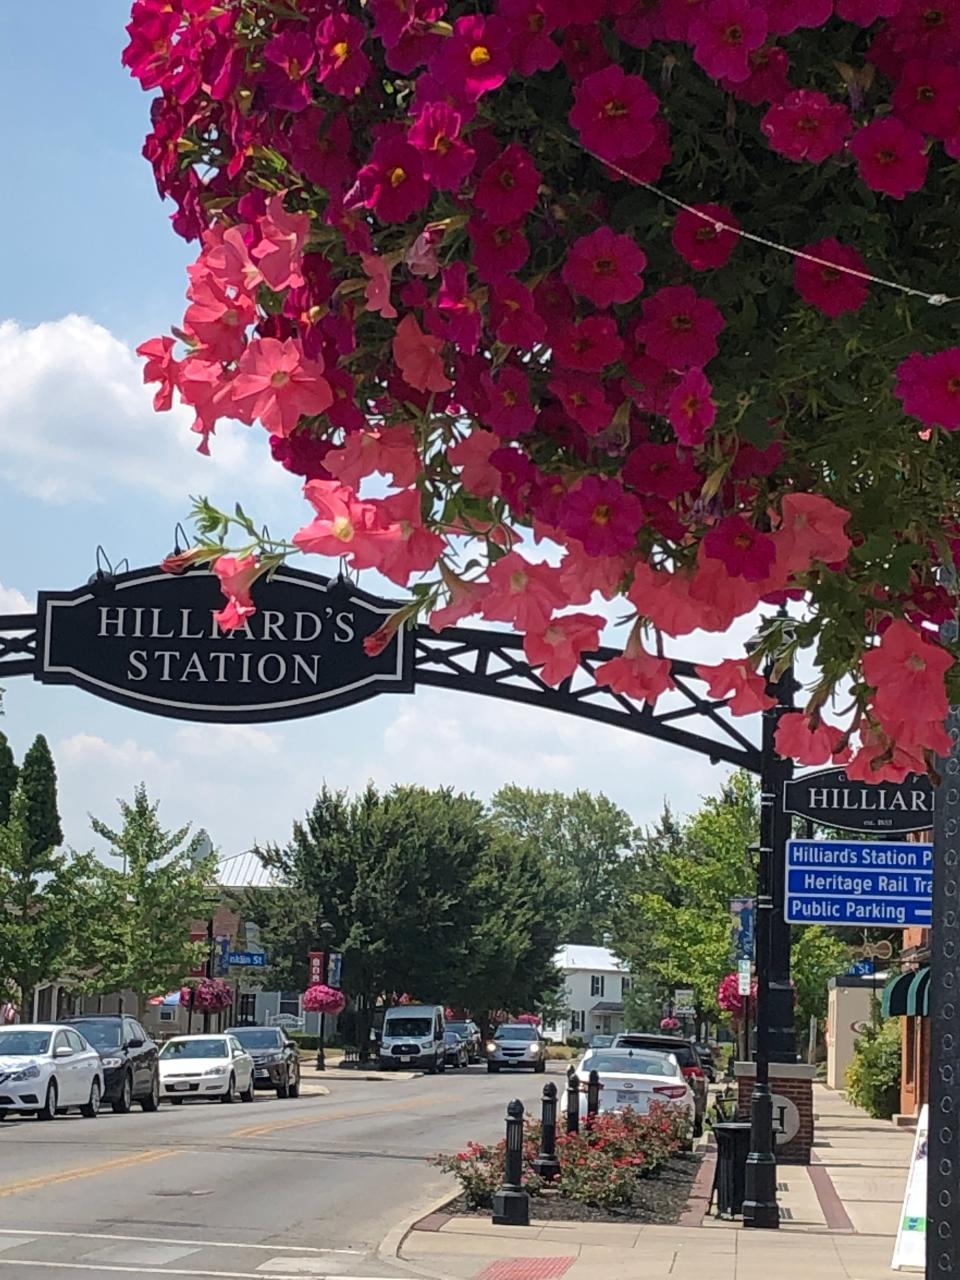 The Old Hilliard district would allow bed-and-breakfast inns and short-term rentals, such as those offered by Airbnb, according to a pending ordinance before Hilliard City Council.